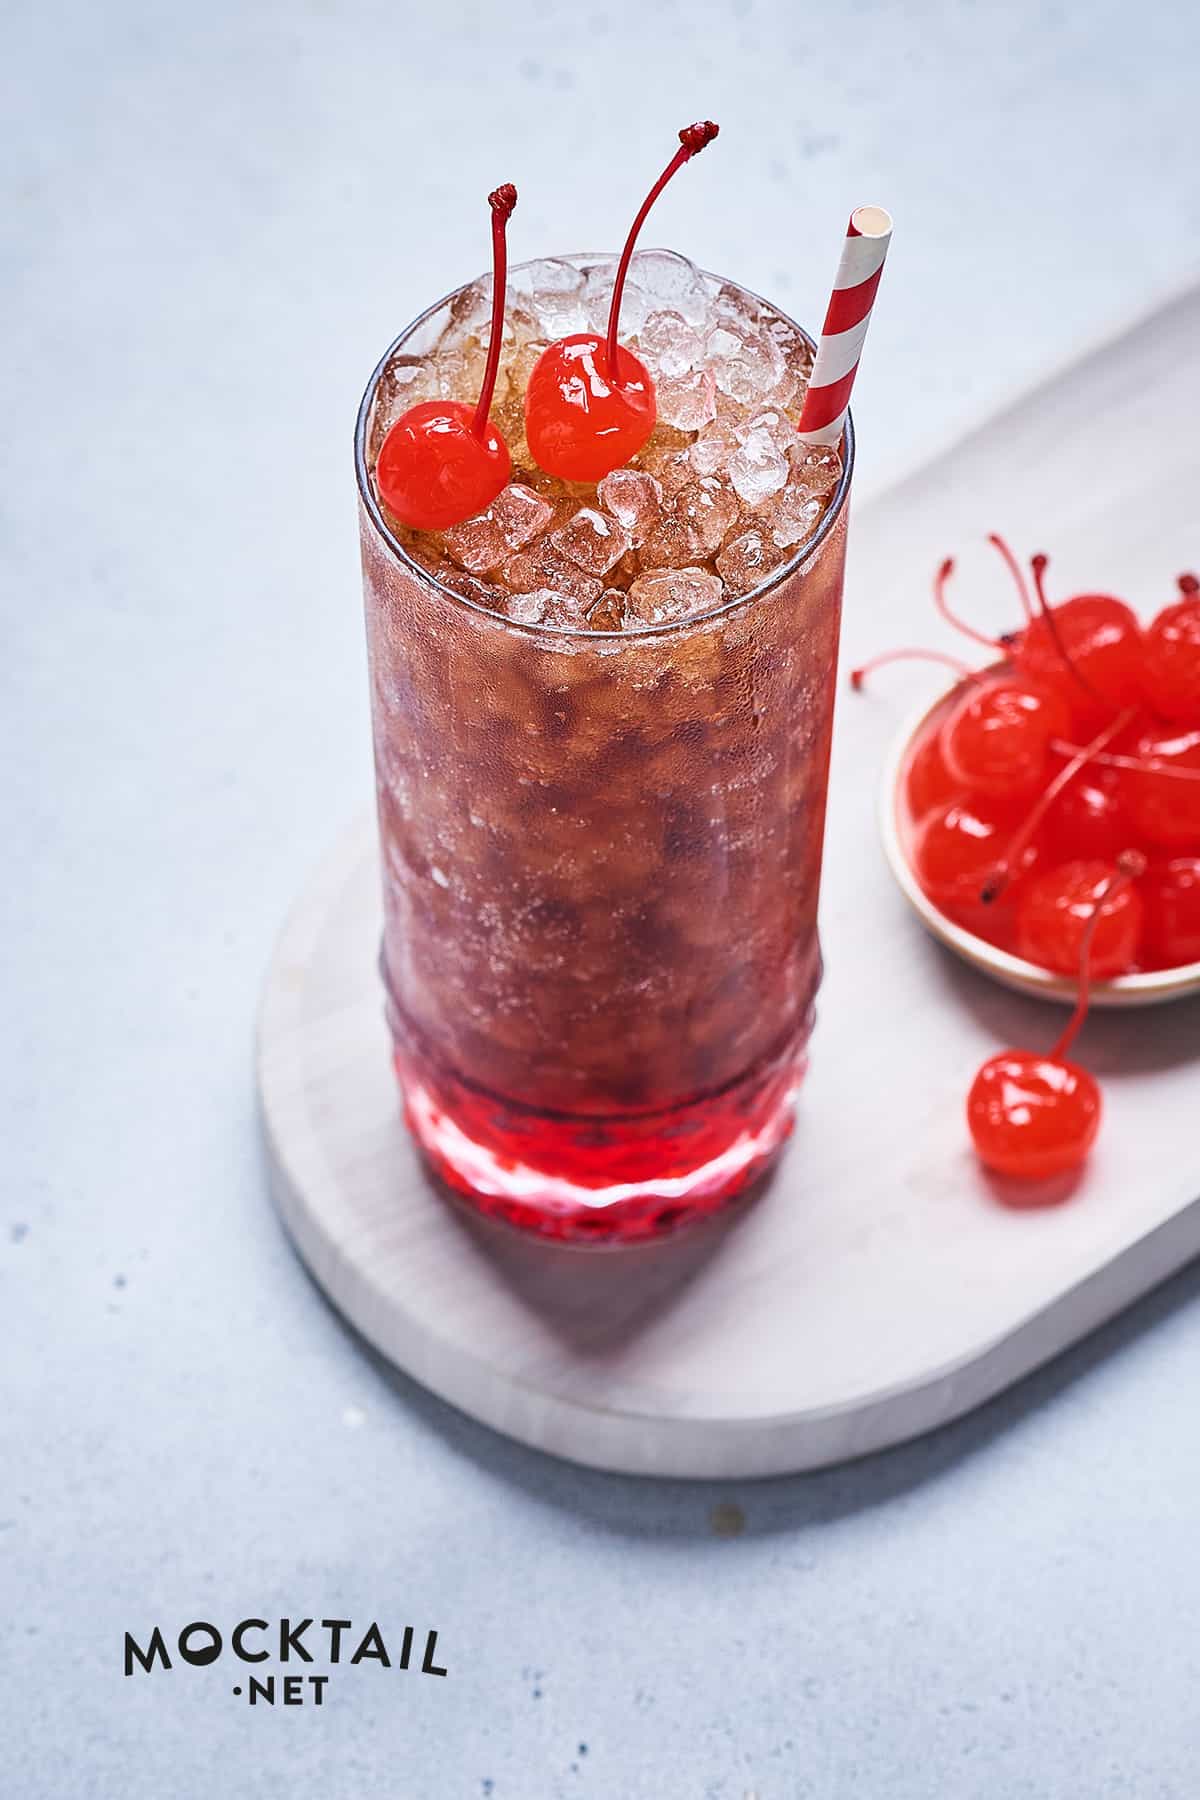 How to Make a Roy Rogers Drink